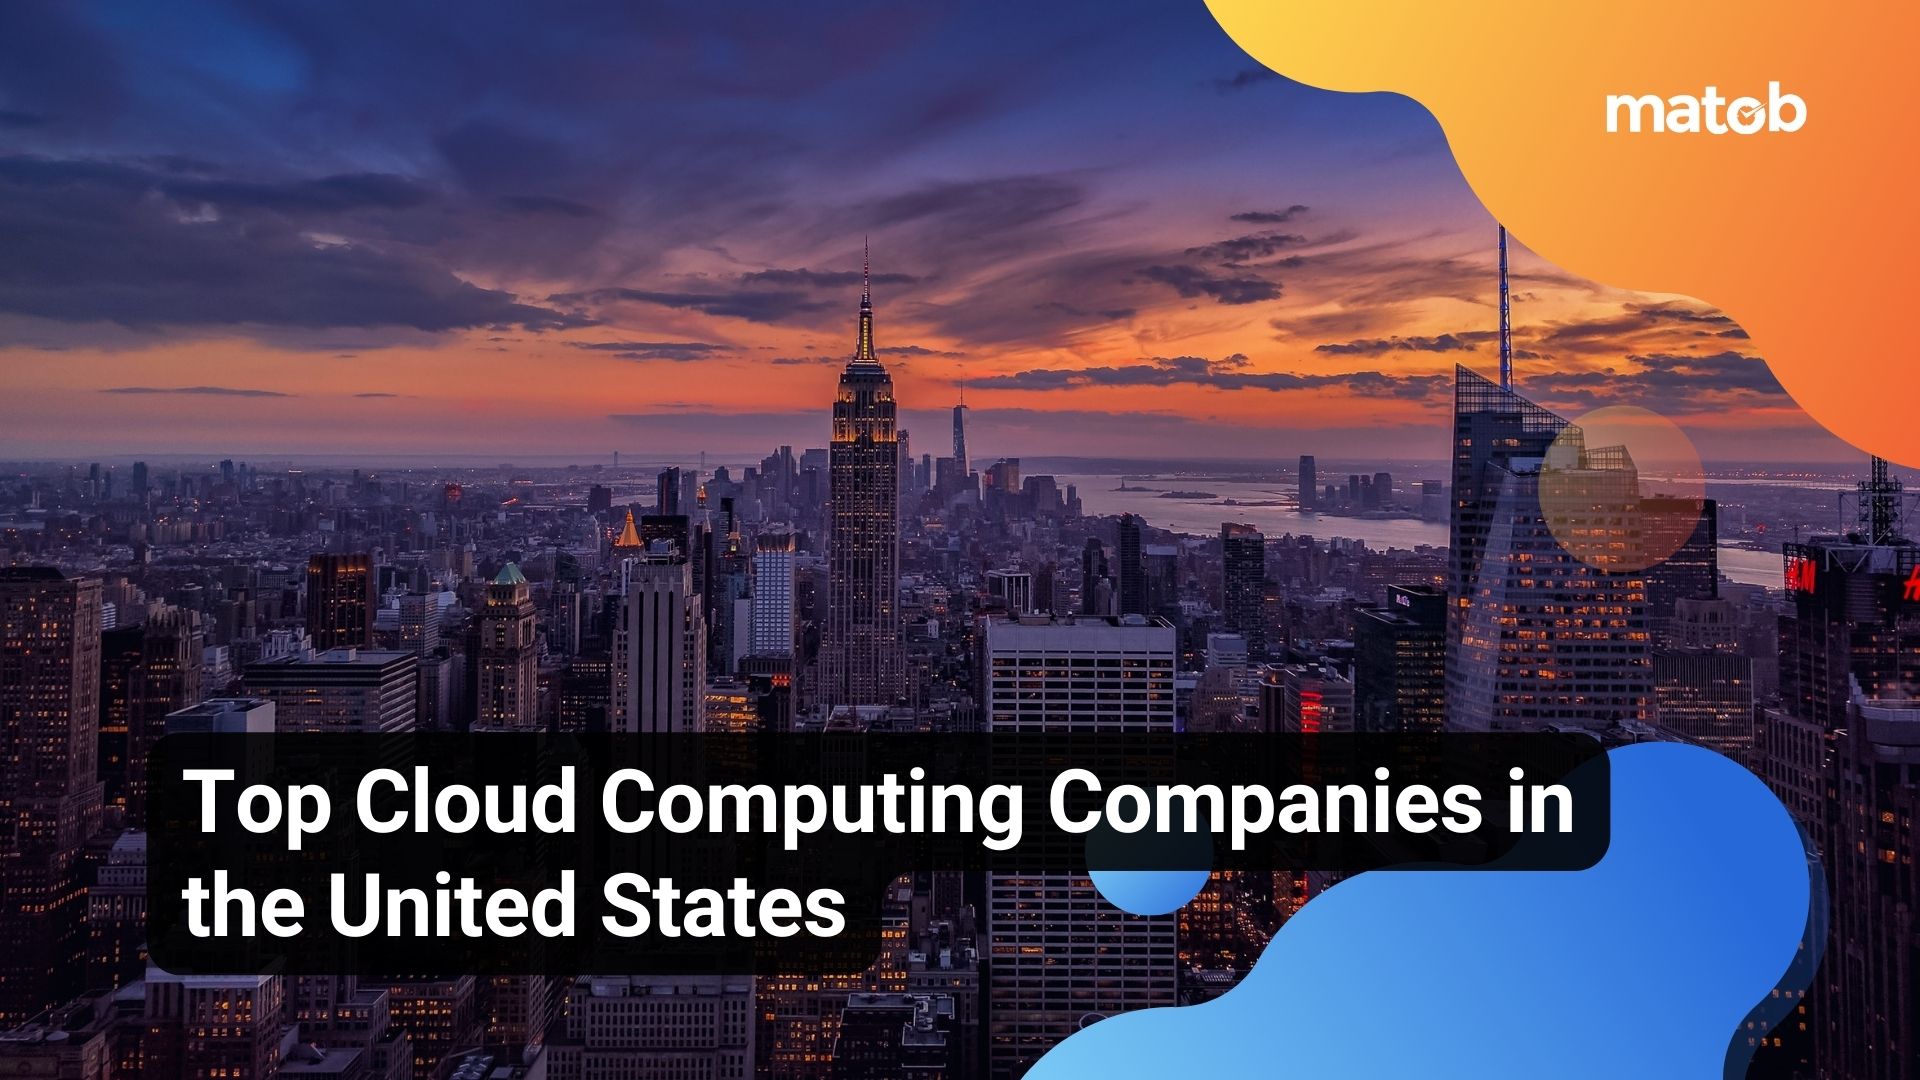 Top Cloud Computing Companies in the United States